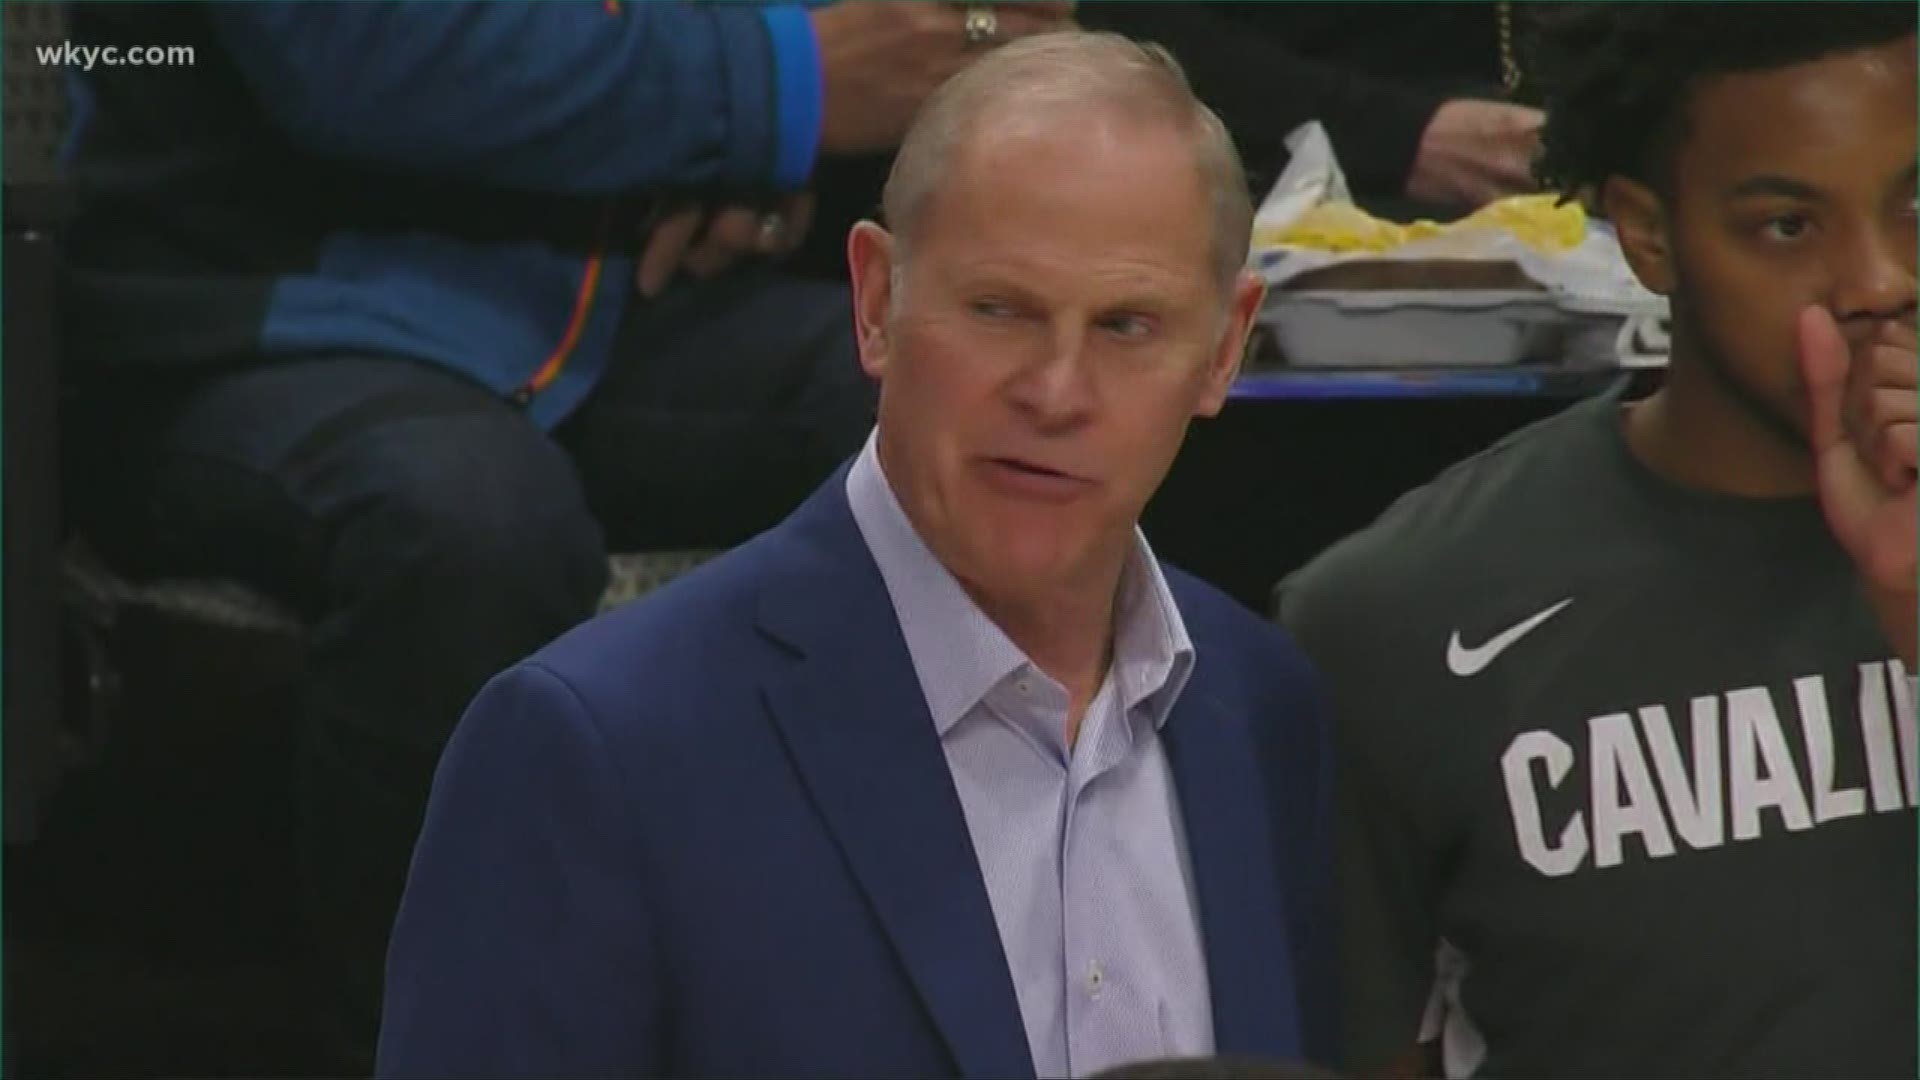 The Cleveland Cavaliers announced on Wednesday that John Beilein has resigned as head coach. He lasted only 54 games.